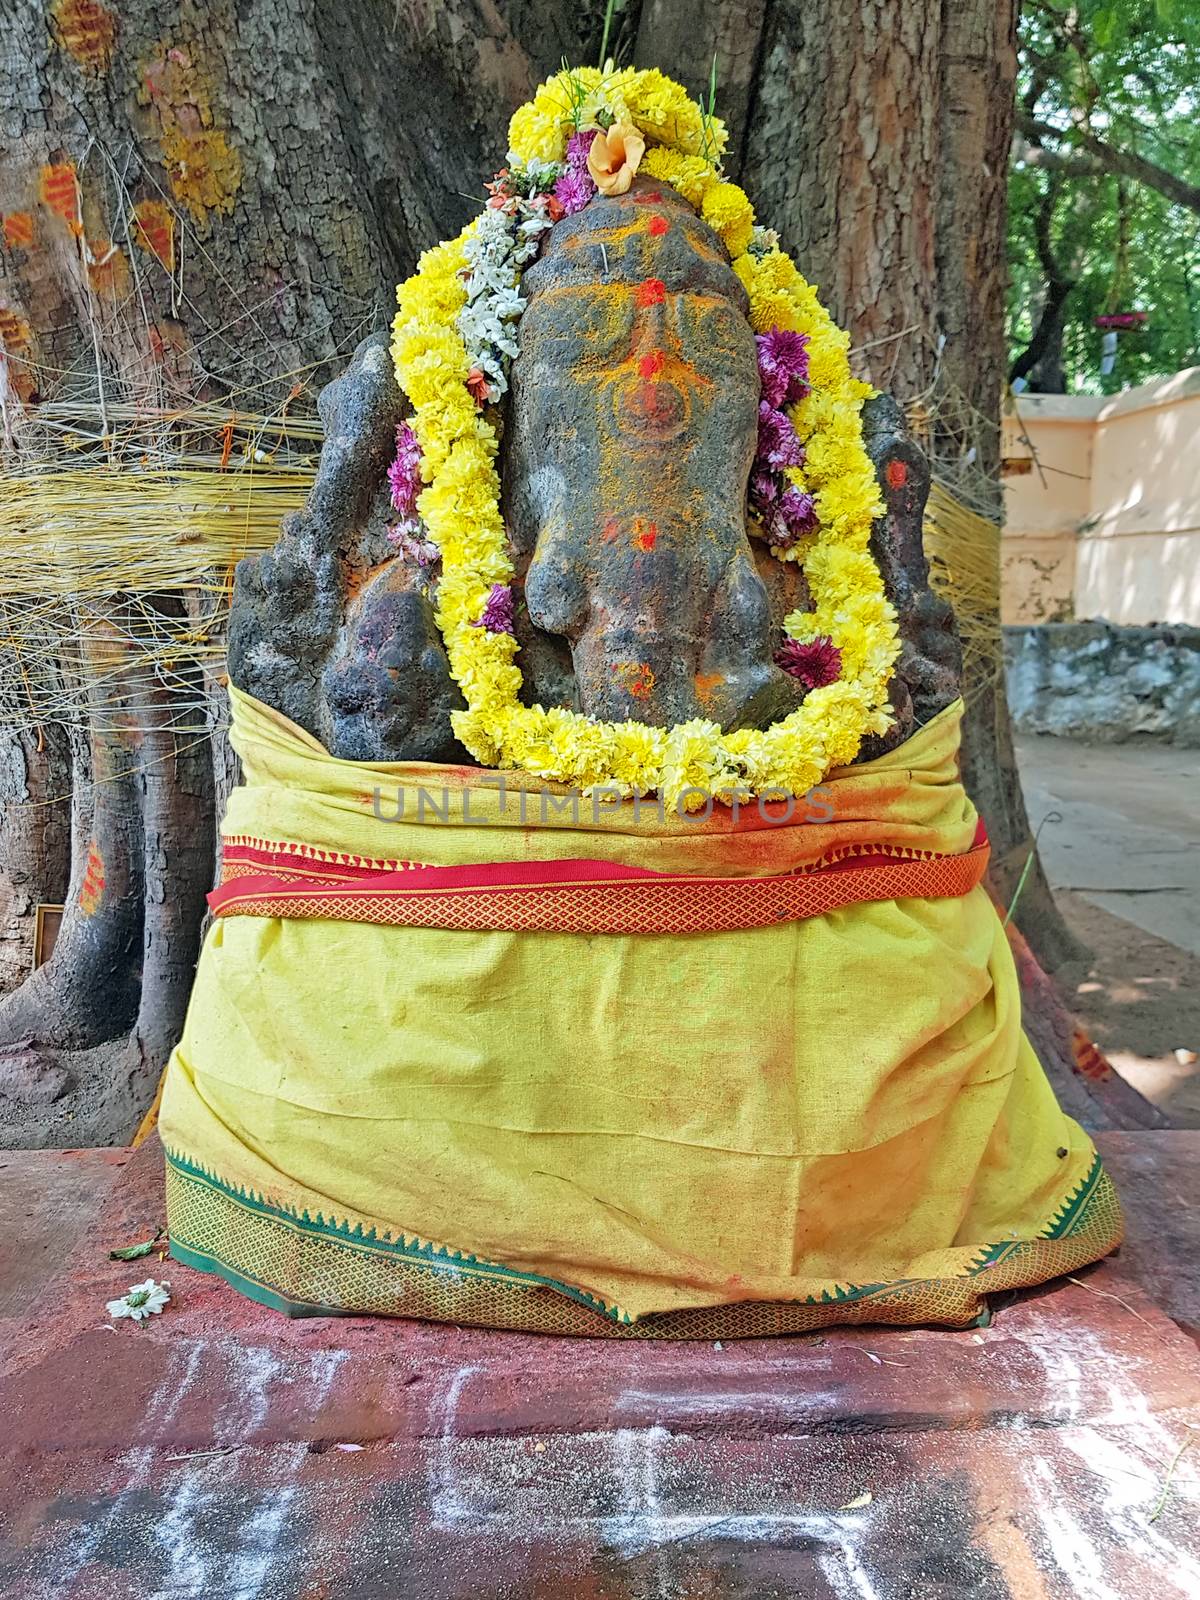 Ancient Ganesha statue in India